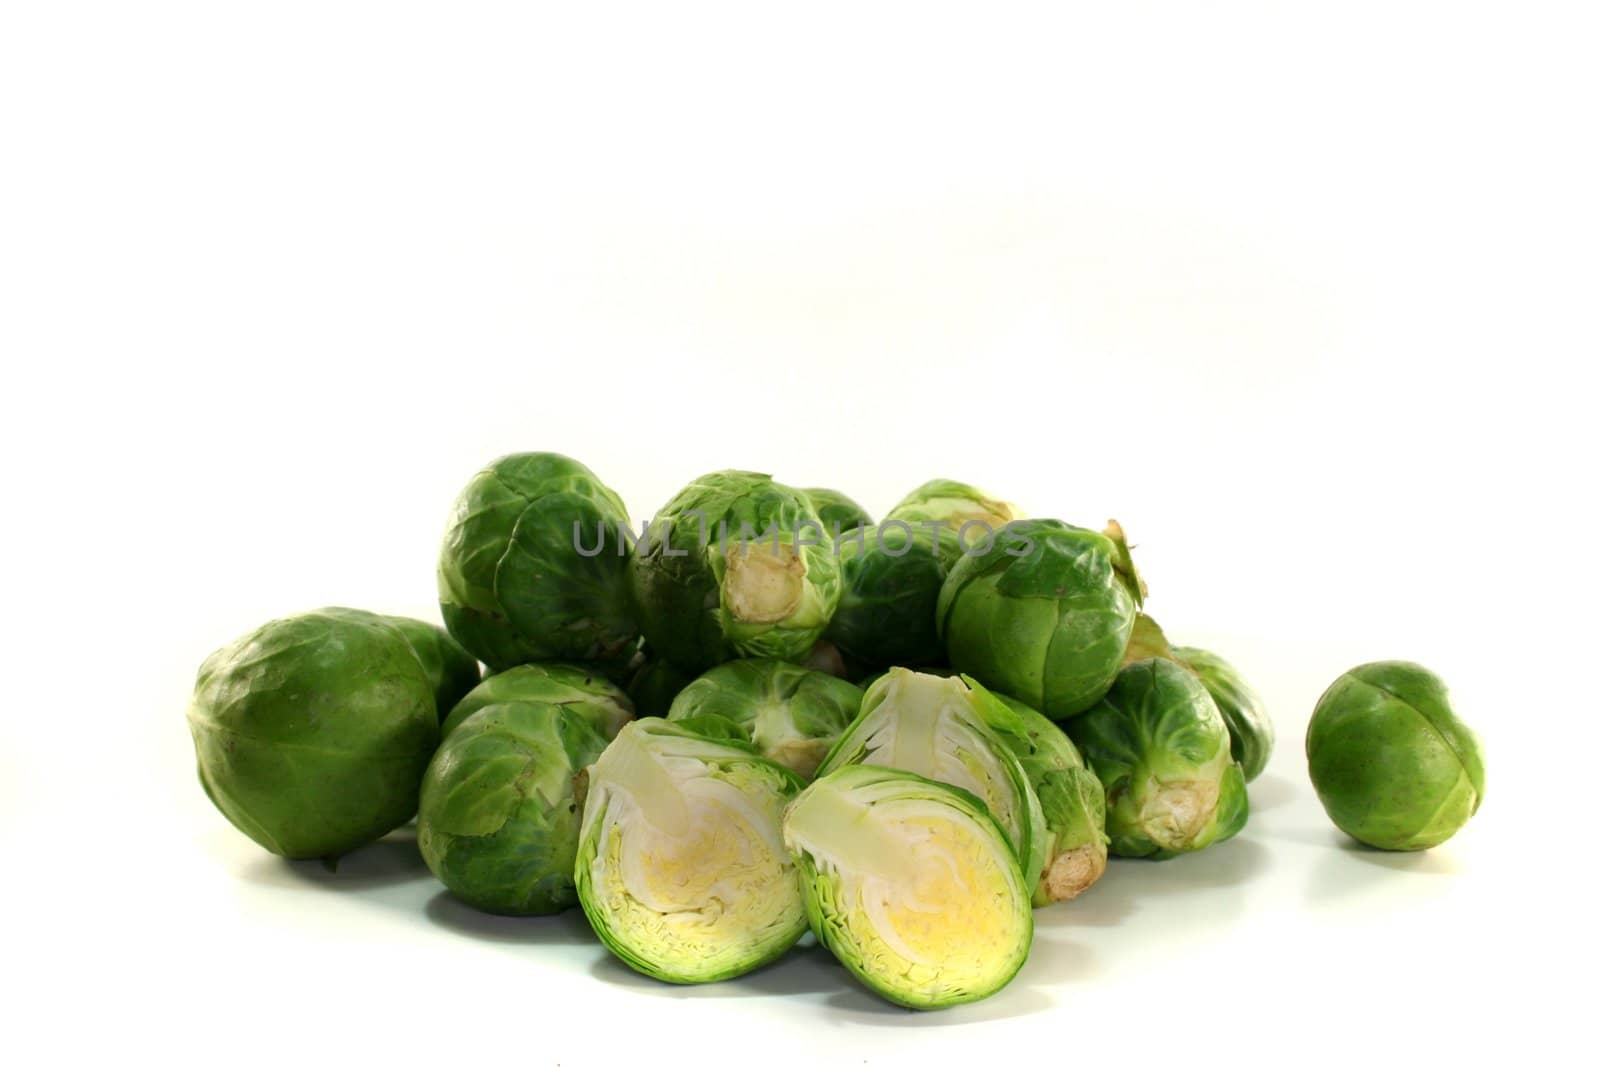 Brussels sprouts by discovery